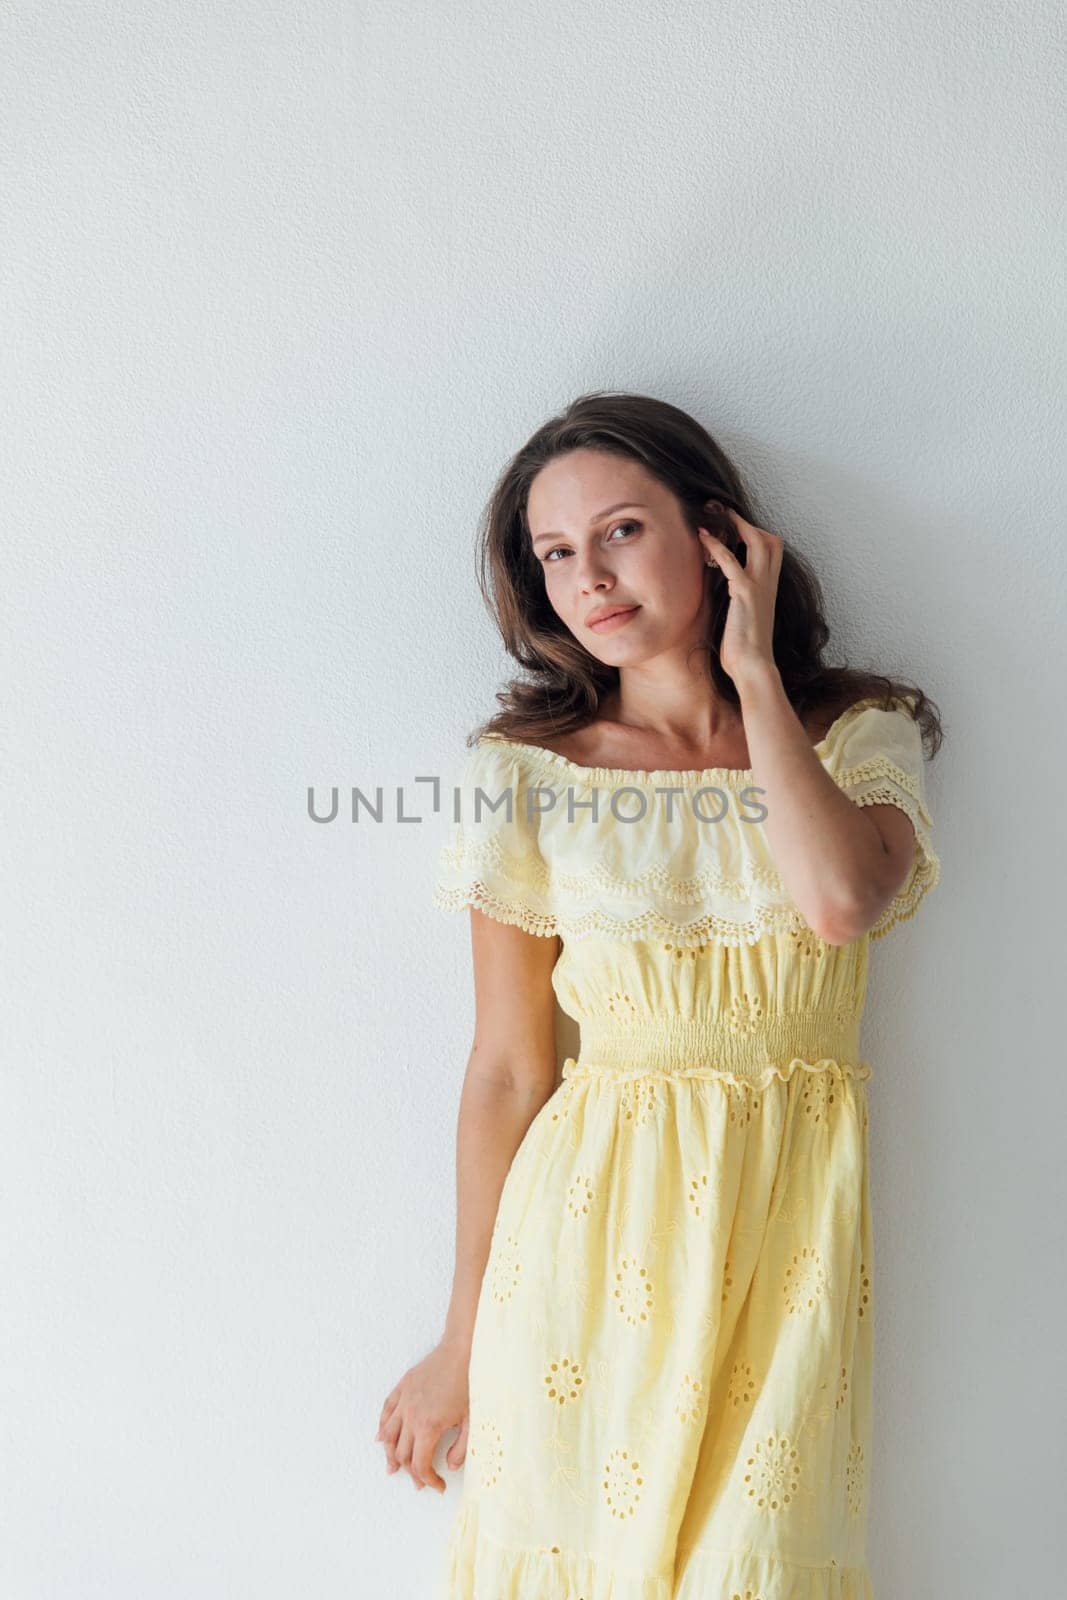 a woman in a yellow dress on a white background poses by Simakov